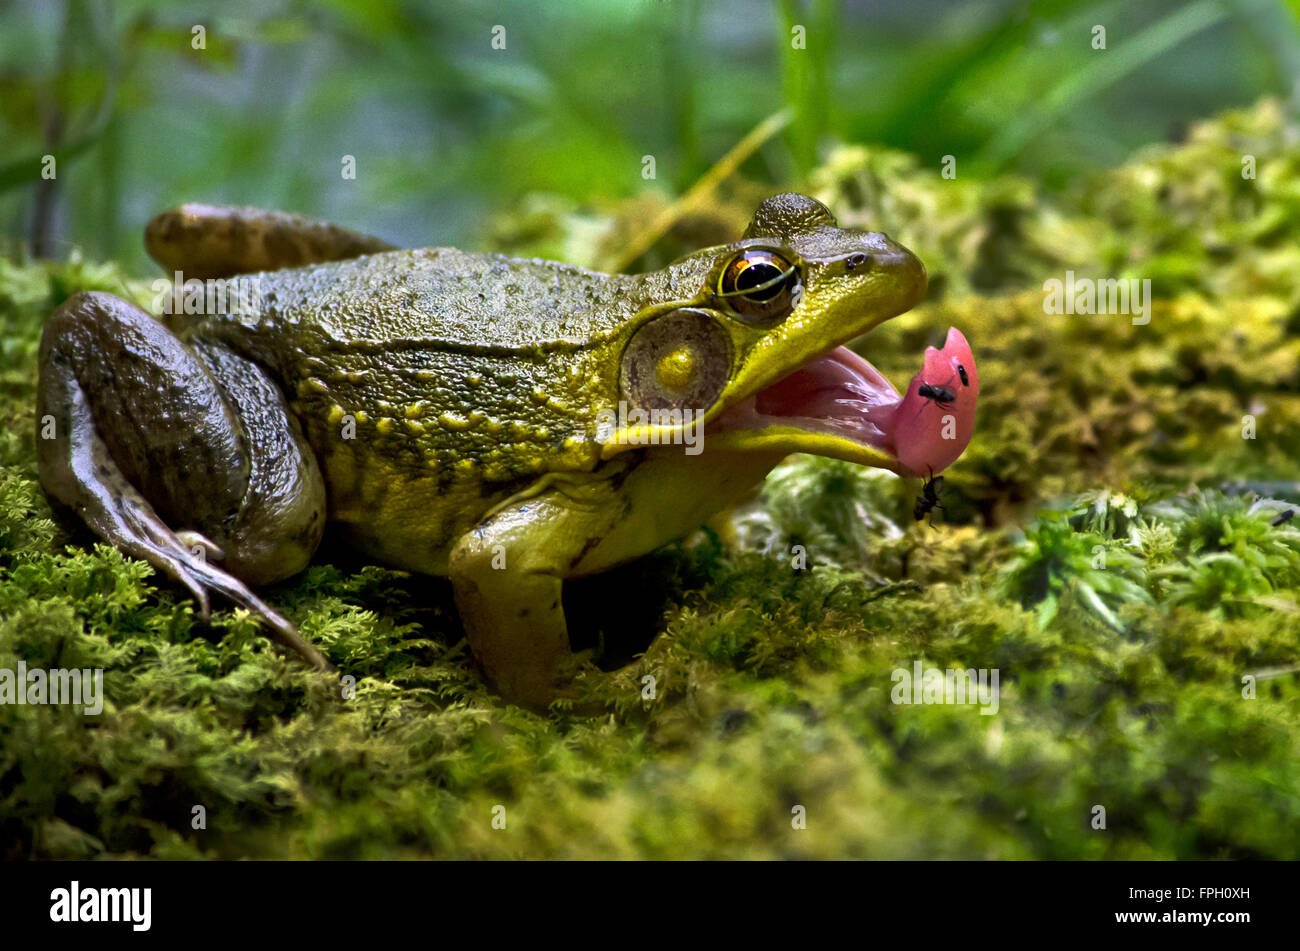 Frog catching flies with mouth open close up. Stock Photo